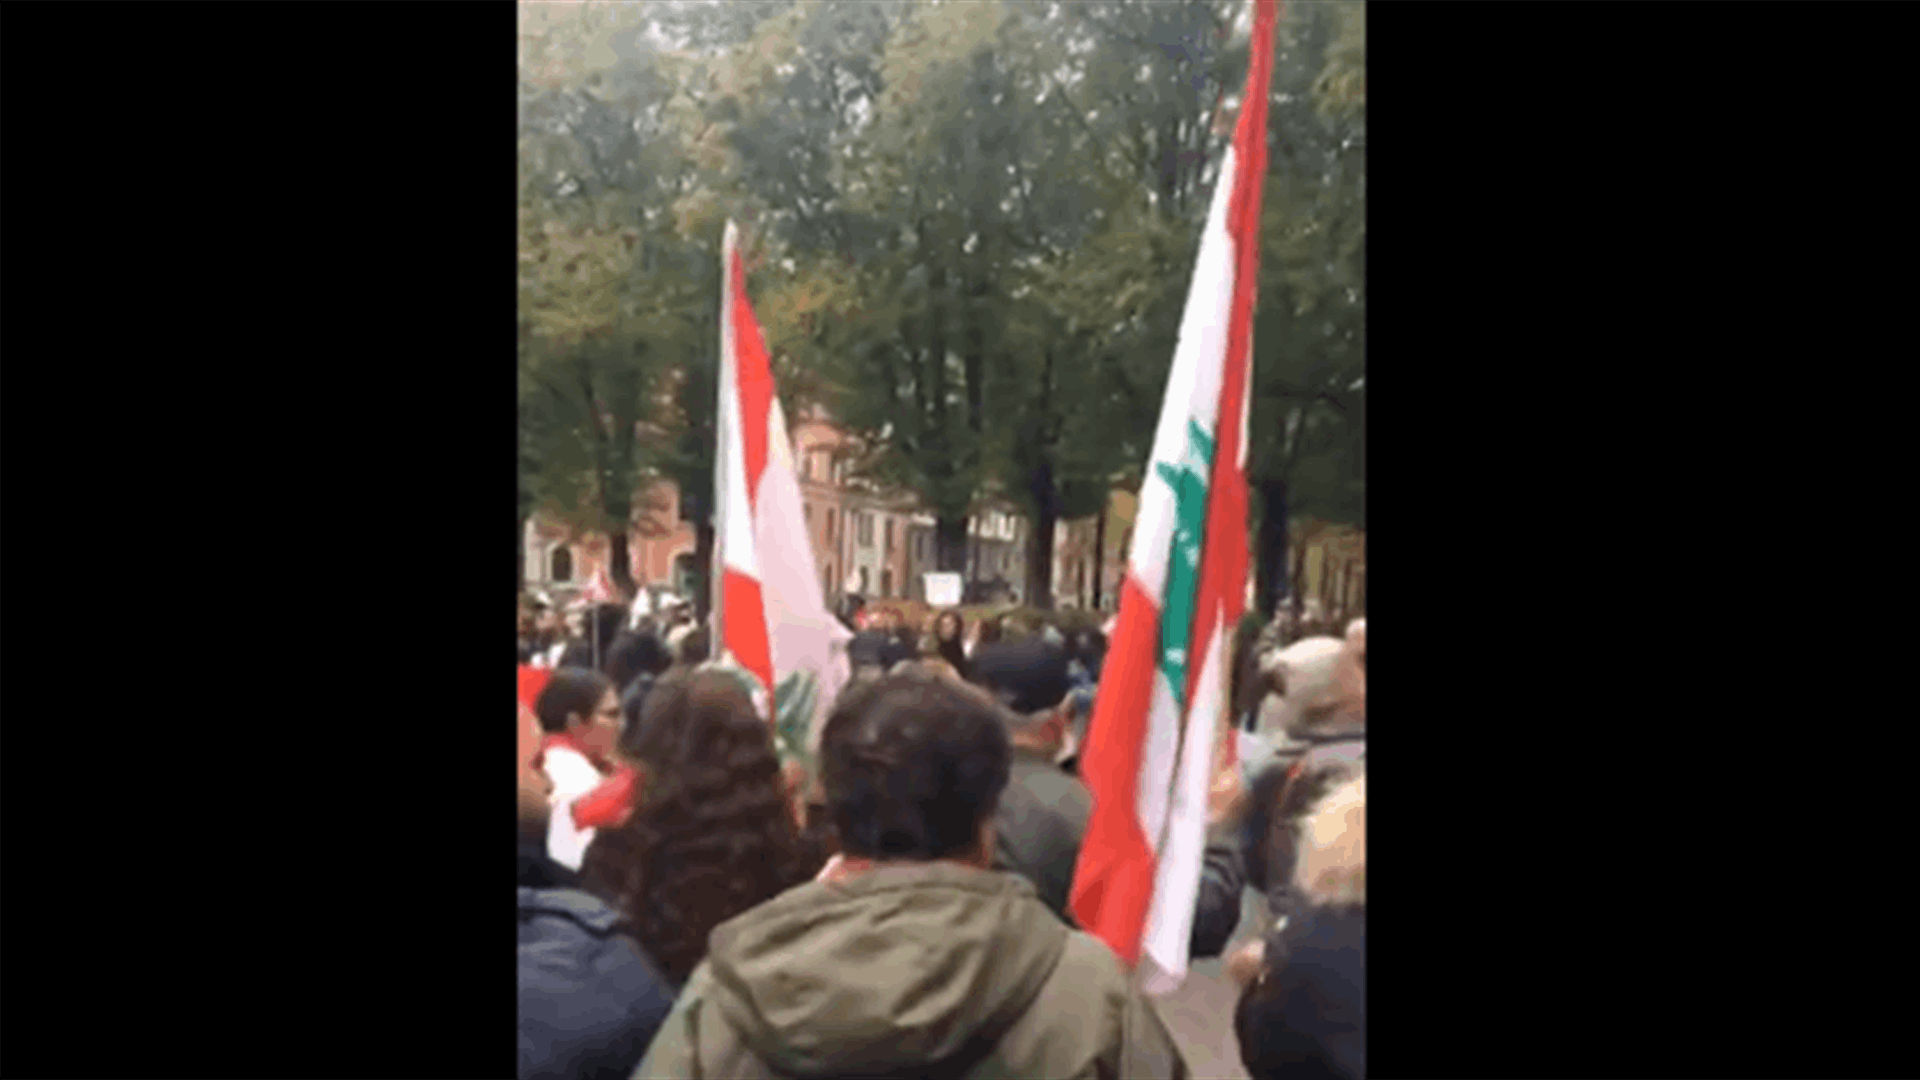 Solidarity with Lebanon from Sweden (Video)